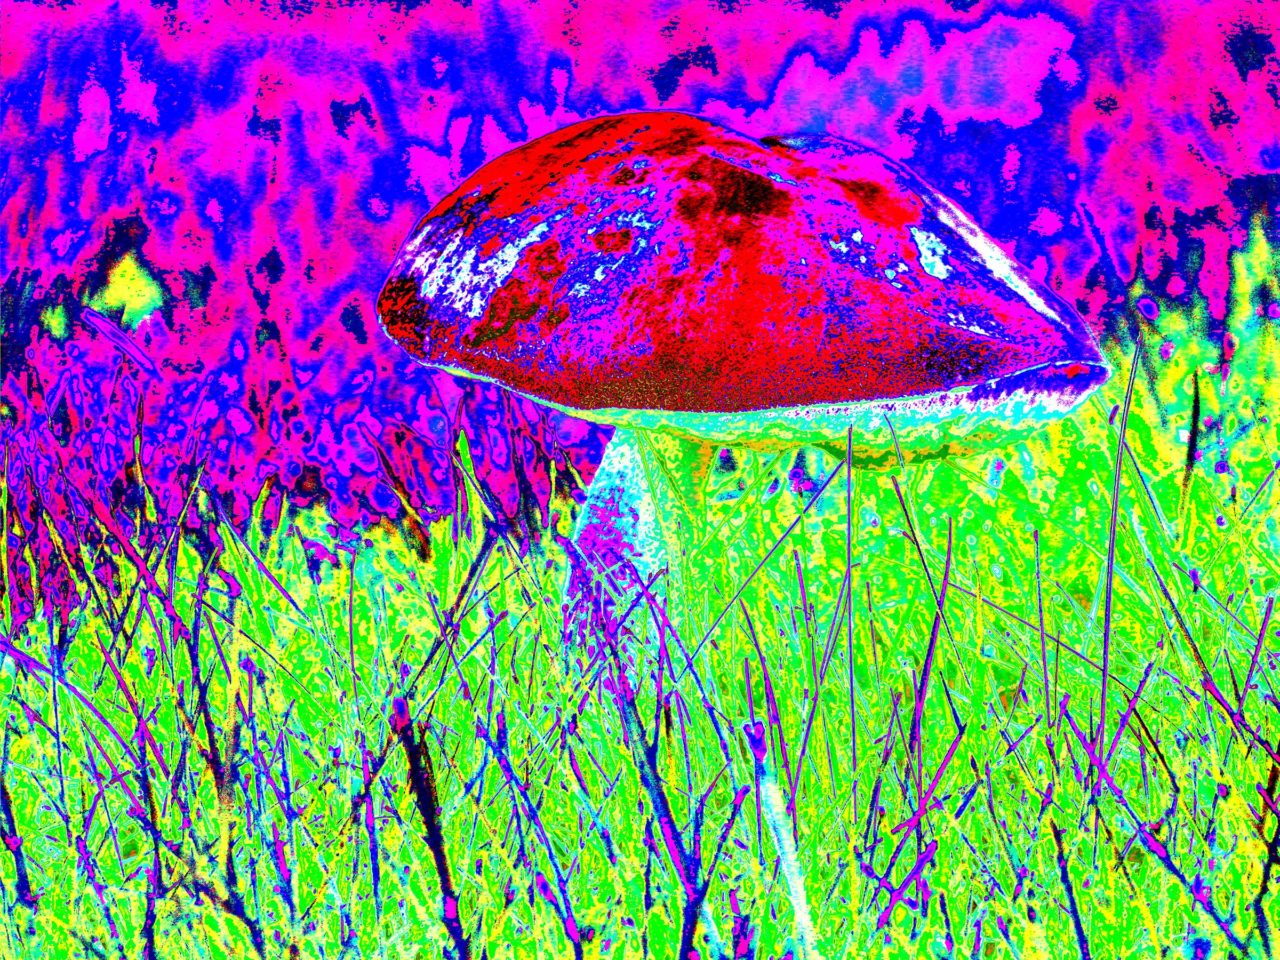 Poll States 28% of Americans Have Tried At Least One Psychedelic Substance